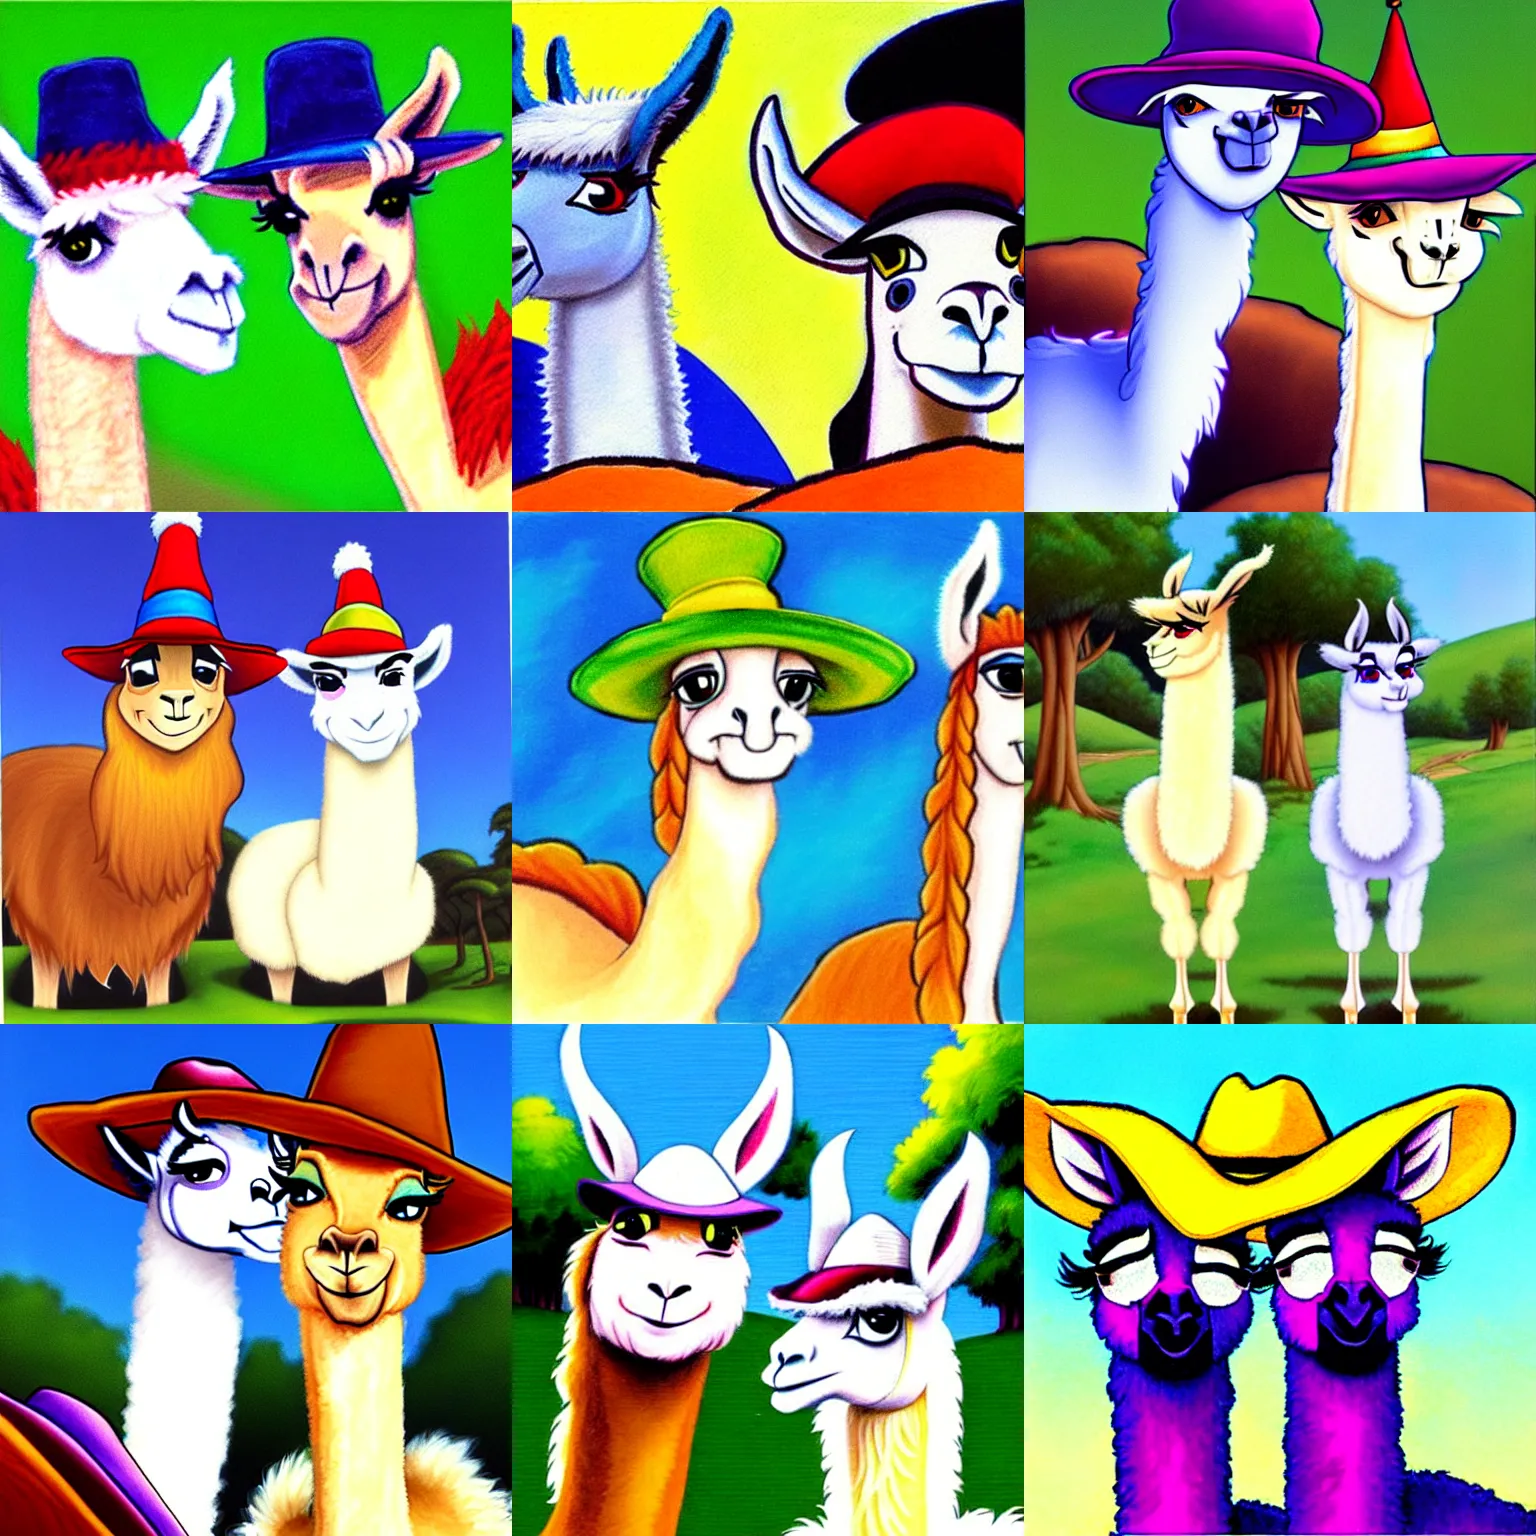 Prompt: 2 llamas+hats, art by Don Bluth